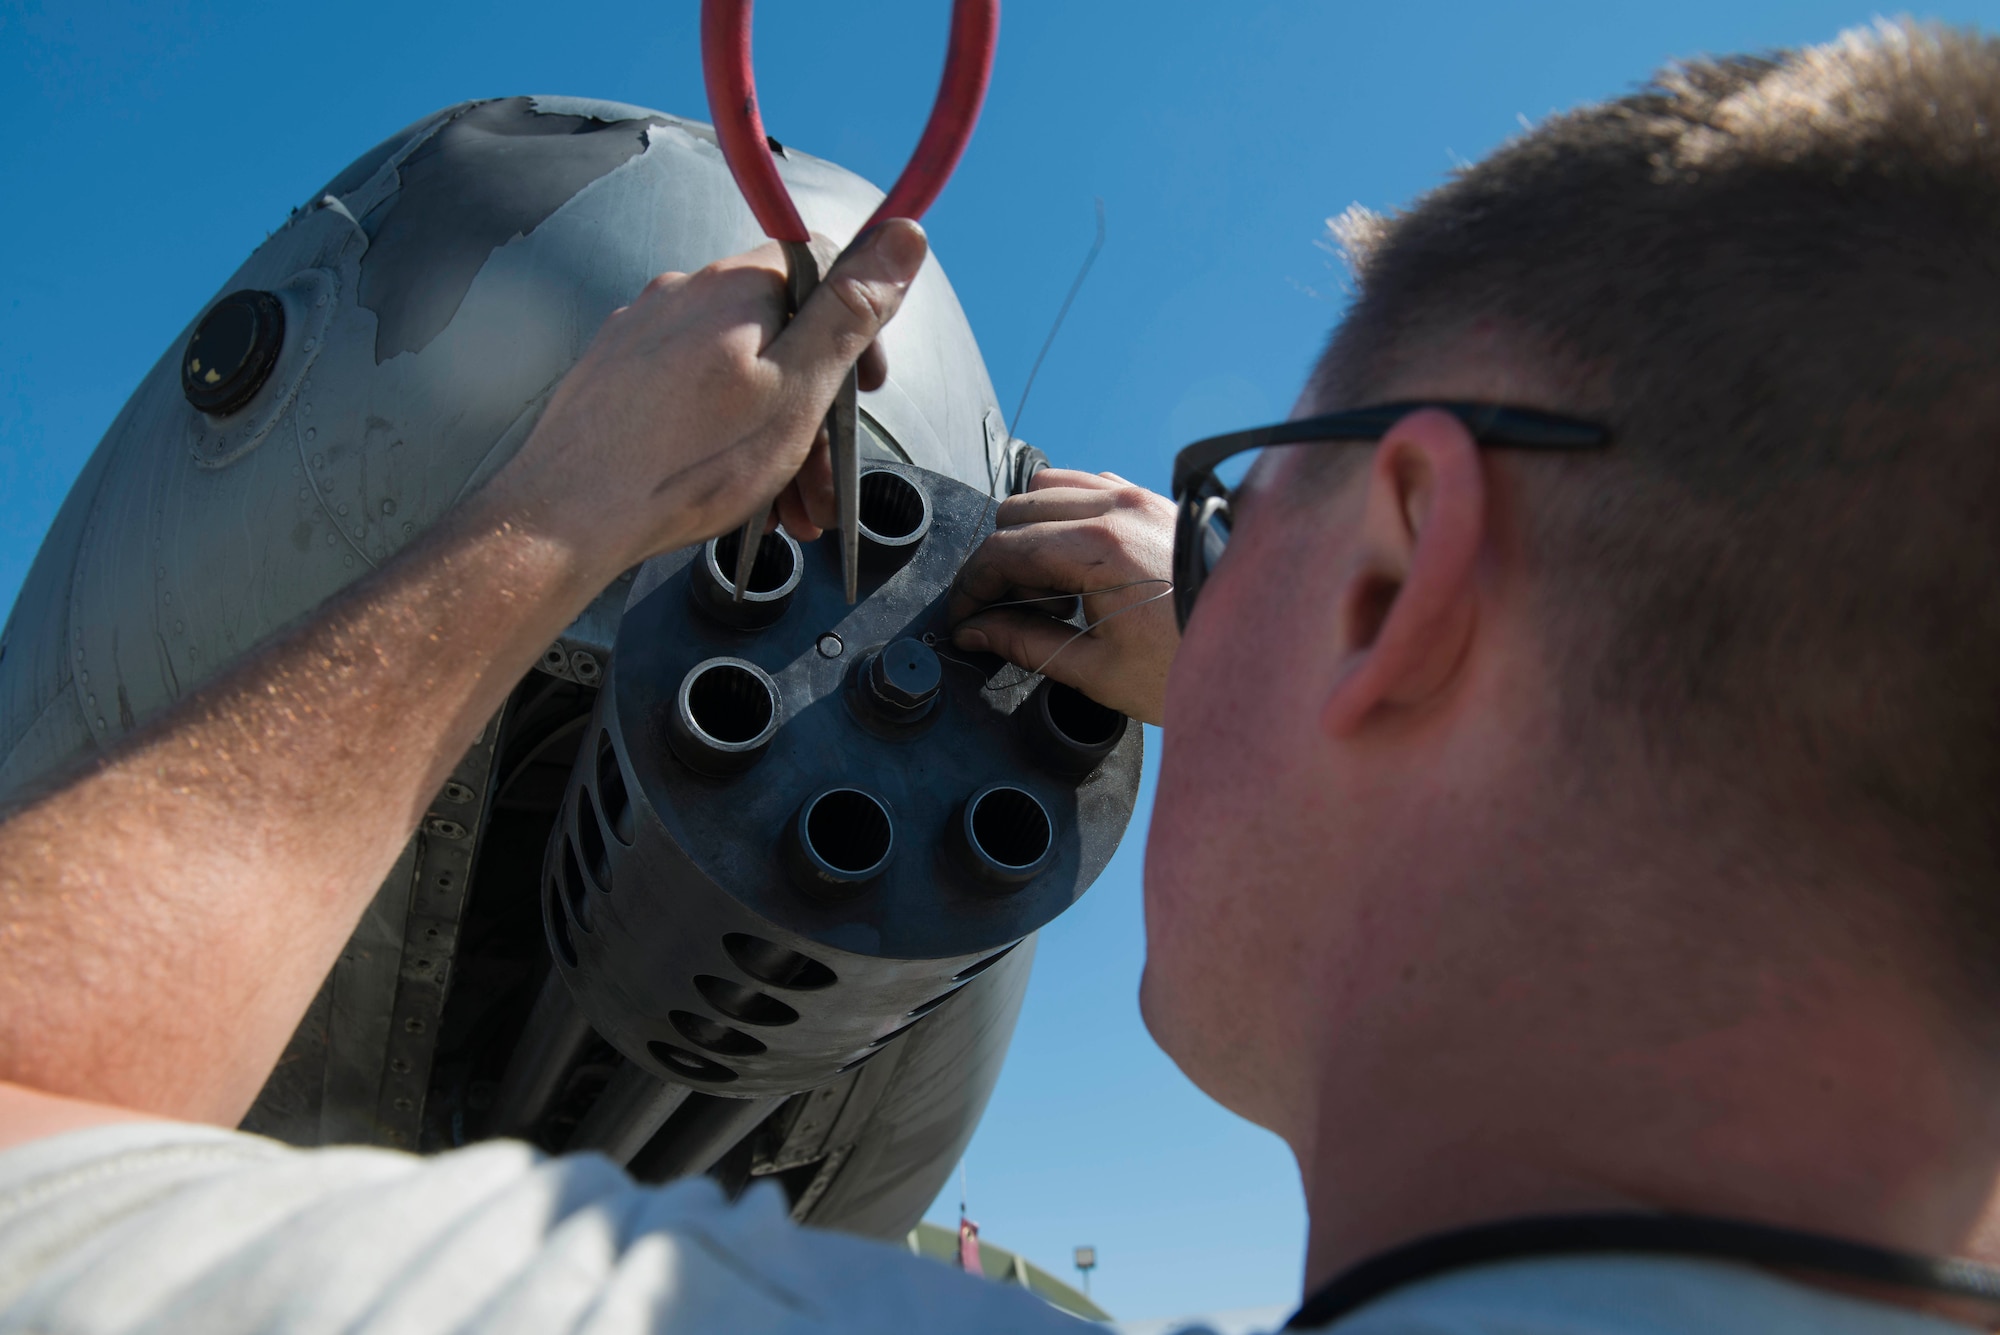 U.S. Air Force Senior Airman Nathaniel Awrey, 447th Expeditionary Aircraft Maintenance Squadron aircraft armament systems journeyman, reassembles an A-10 Thunderbolt II GAU-8/A Avenger rotary cannon April 5, 2017, at Incirlik Air Base, Turkey. The seven barrels are inspected and replaced after 30 thousand rounds are fired through them. (U.S. Air Force photo by Airman 1st Class Devin M. Rumbaugh)